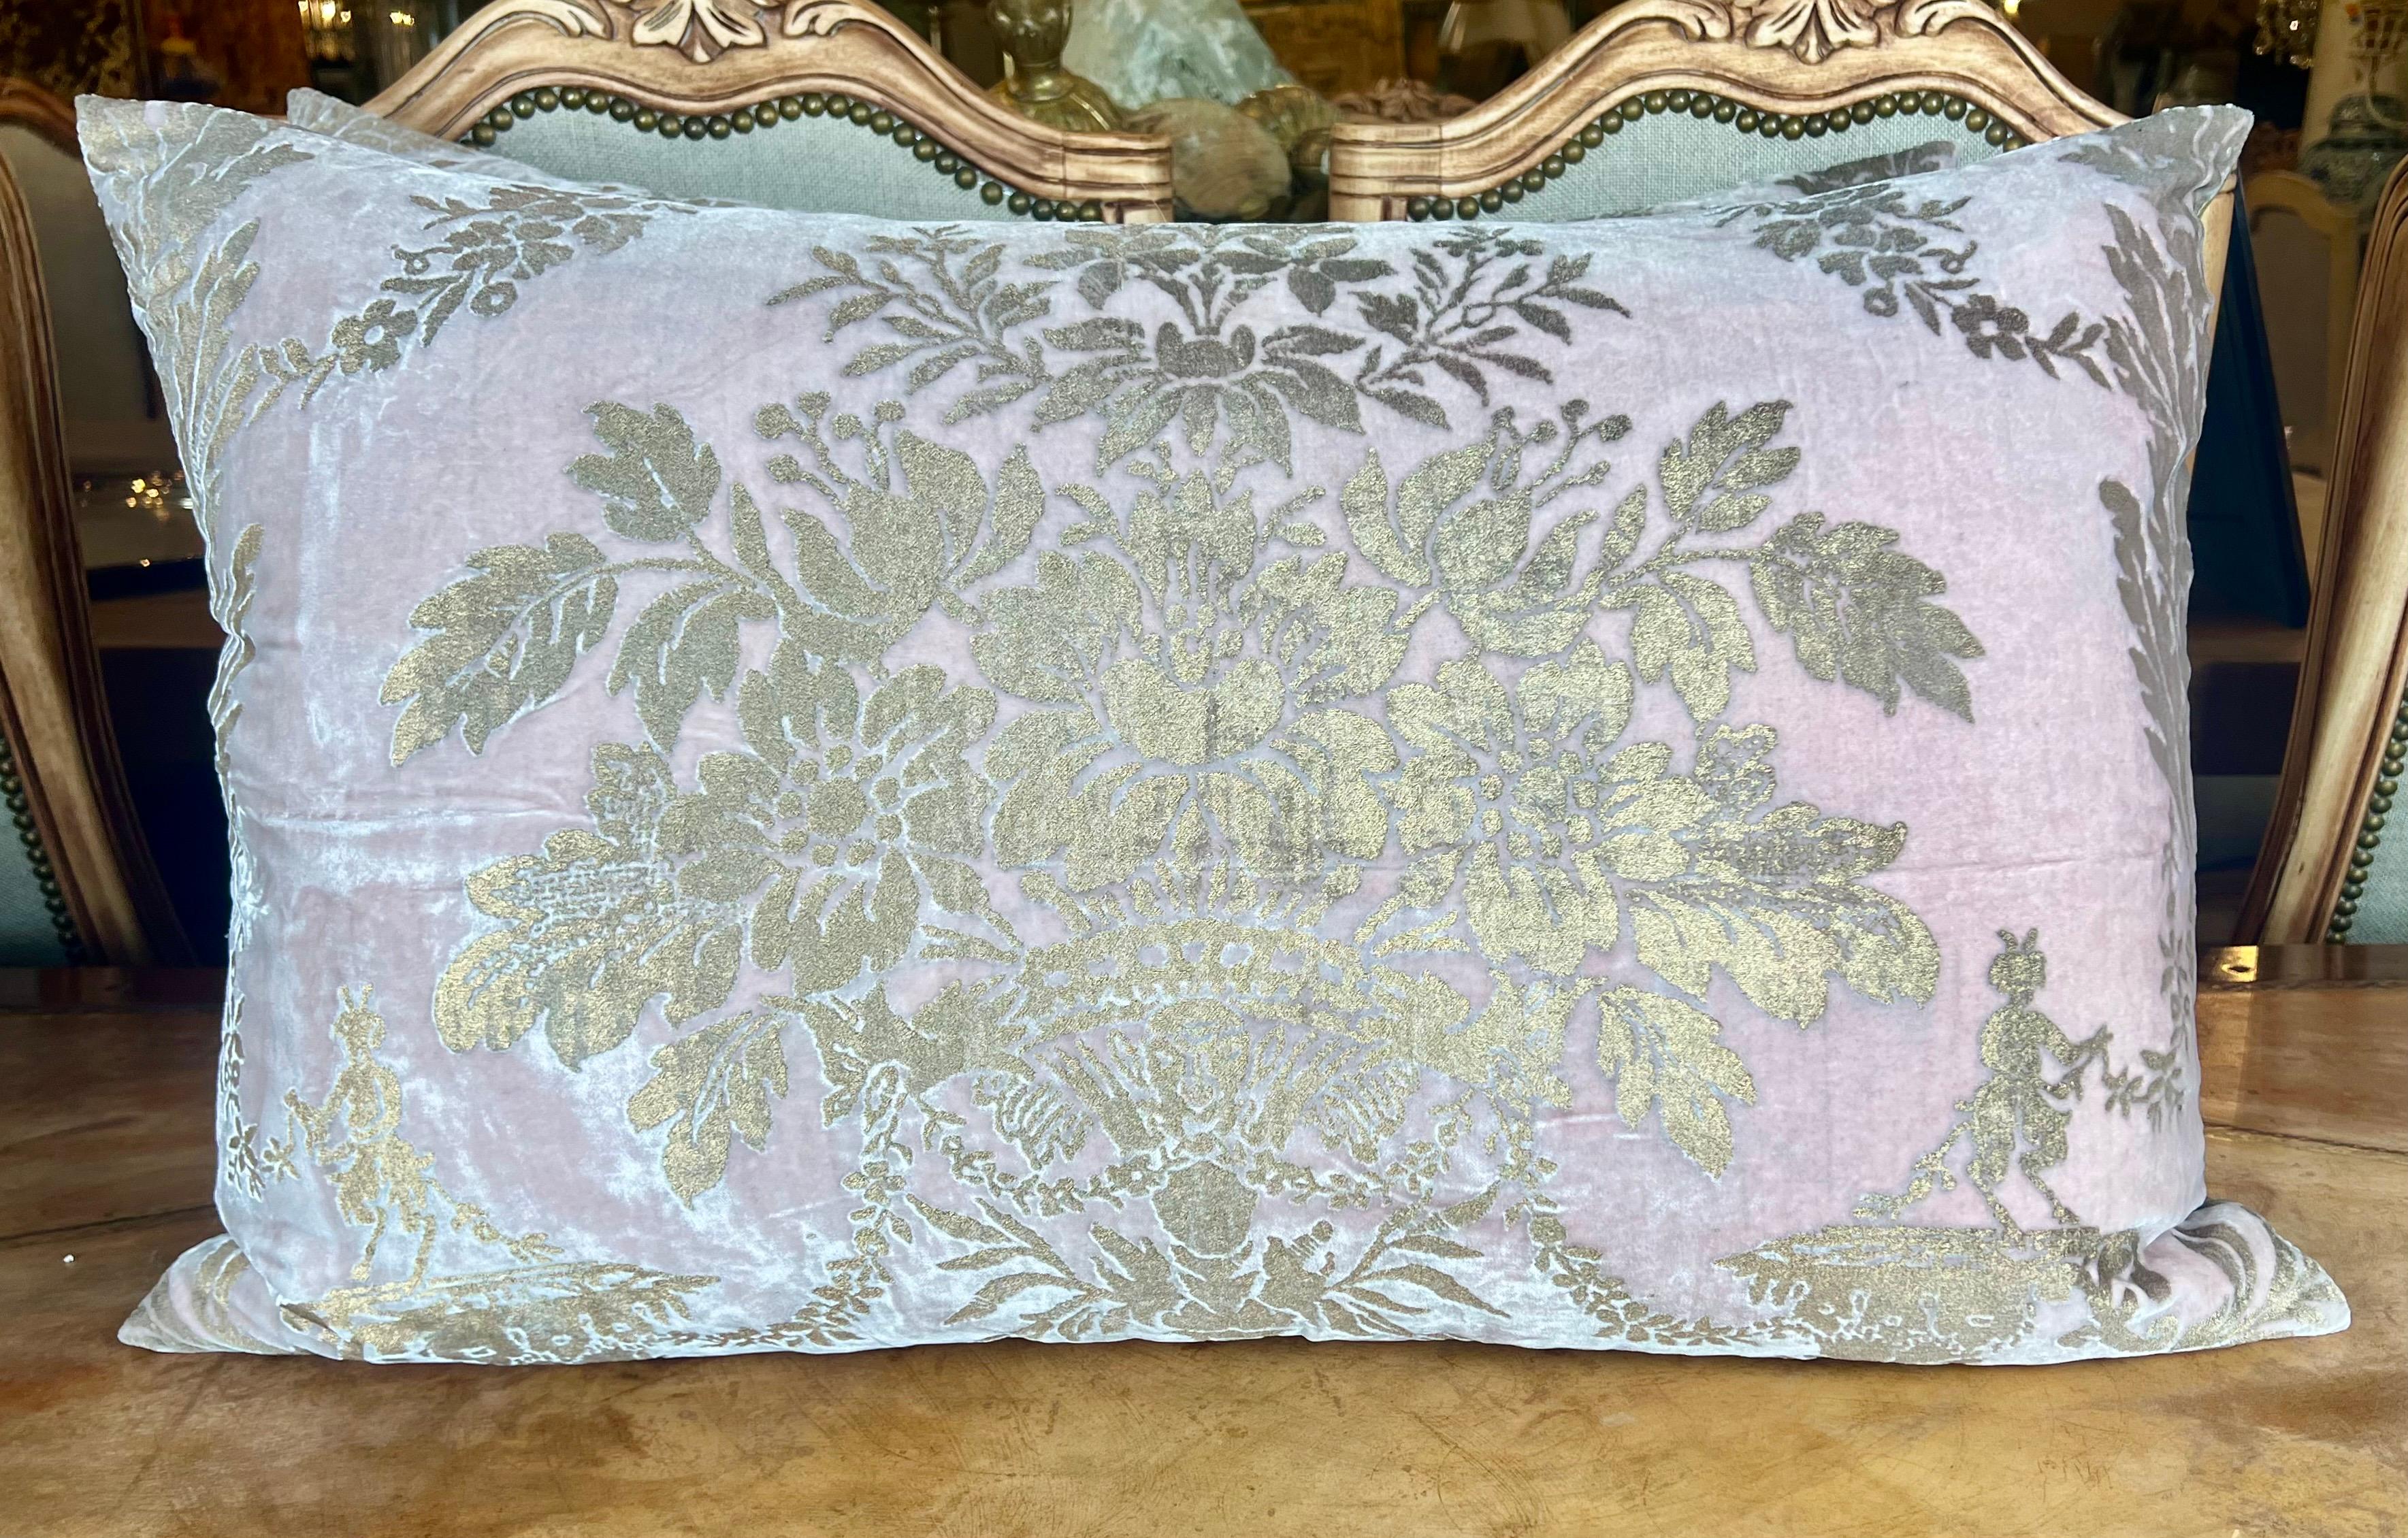 Beautiful pair of pillows made with rare Mariano Fortuny velvet. They feature a metallic gold bouquet of flowers in the center on a soft pink velvet background. There are coordinating silk backs and down filled inserts combining both elegance and